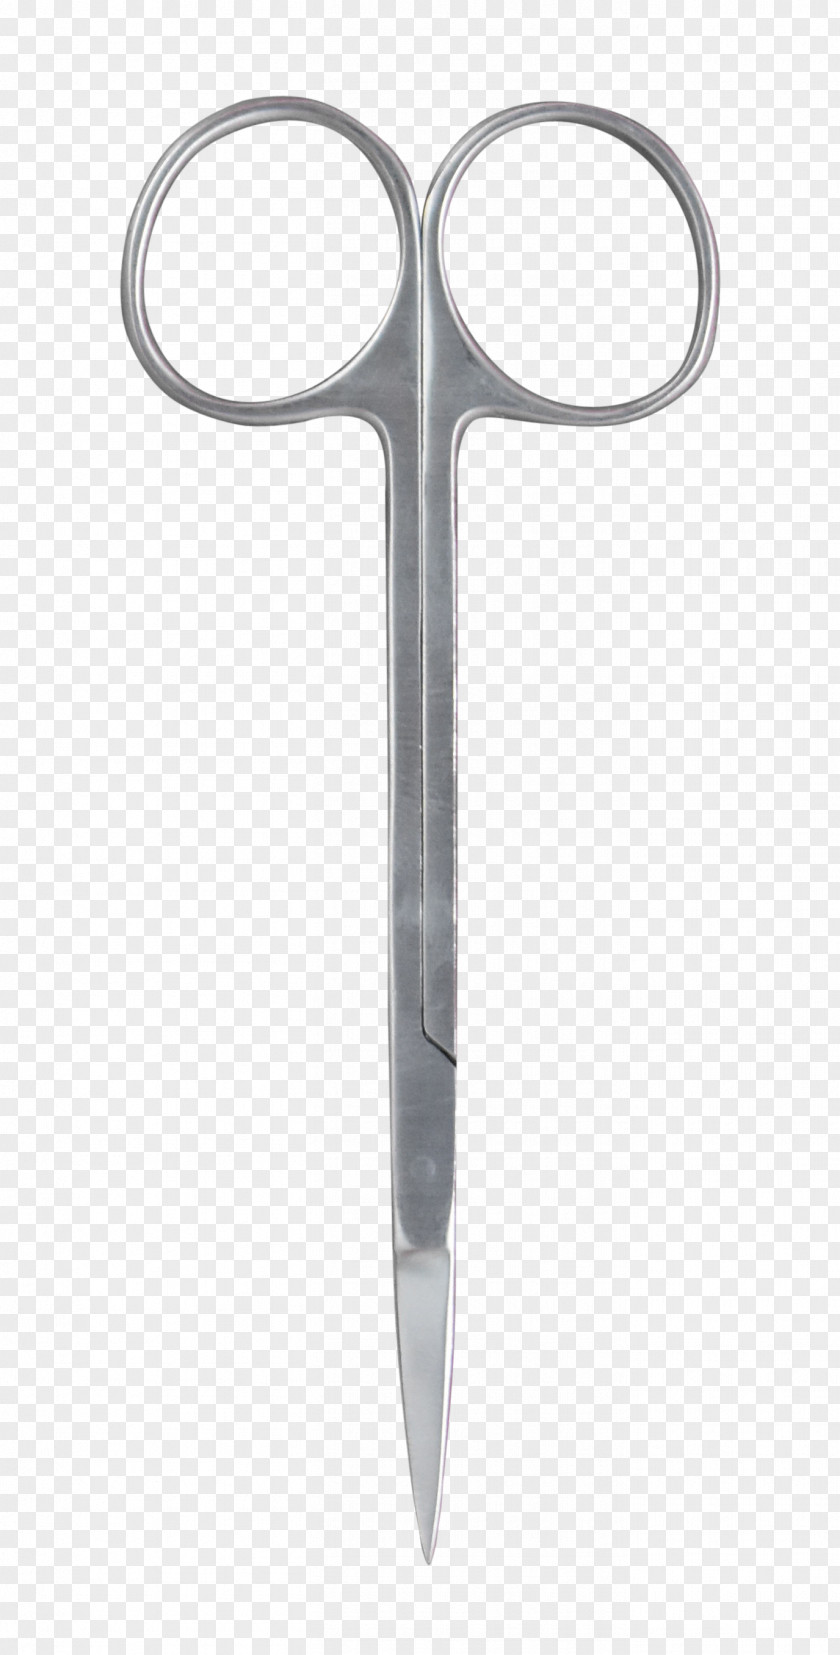 A Pair Of Scissors PNG